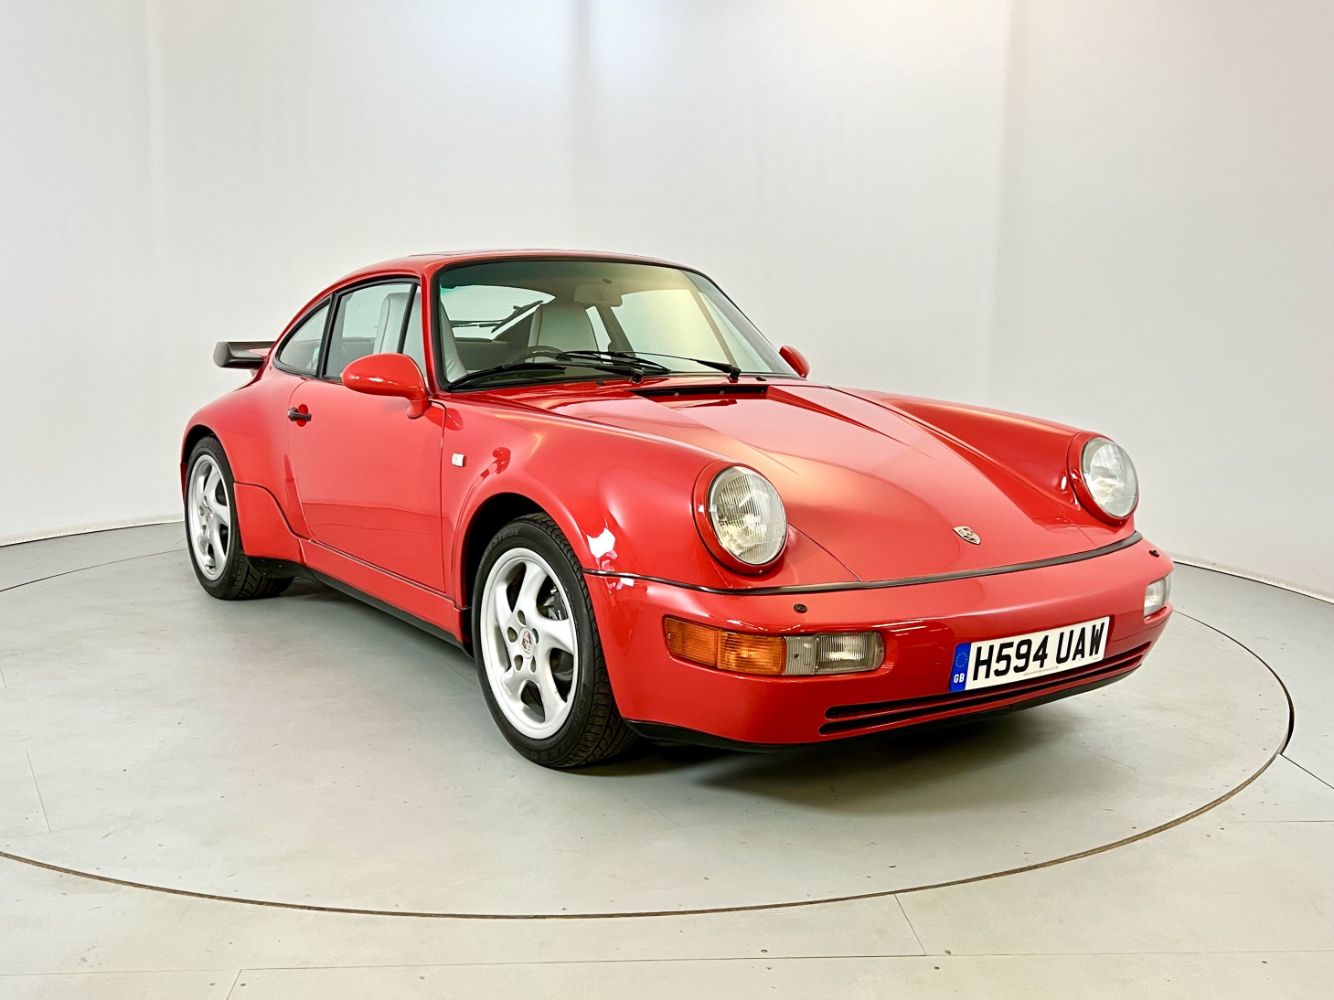 WB & Sons classic, retro and modern classic car auction - 11th March 2023